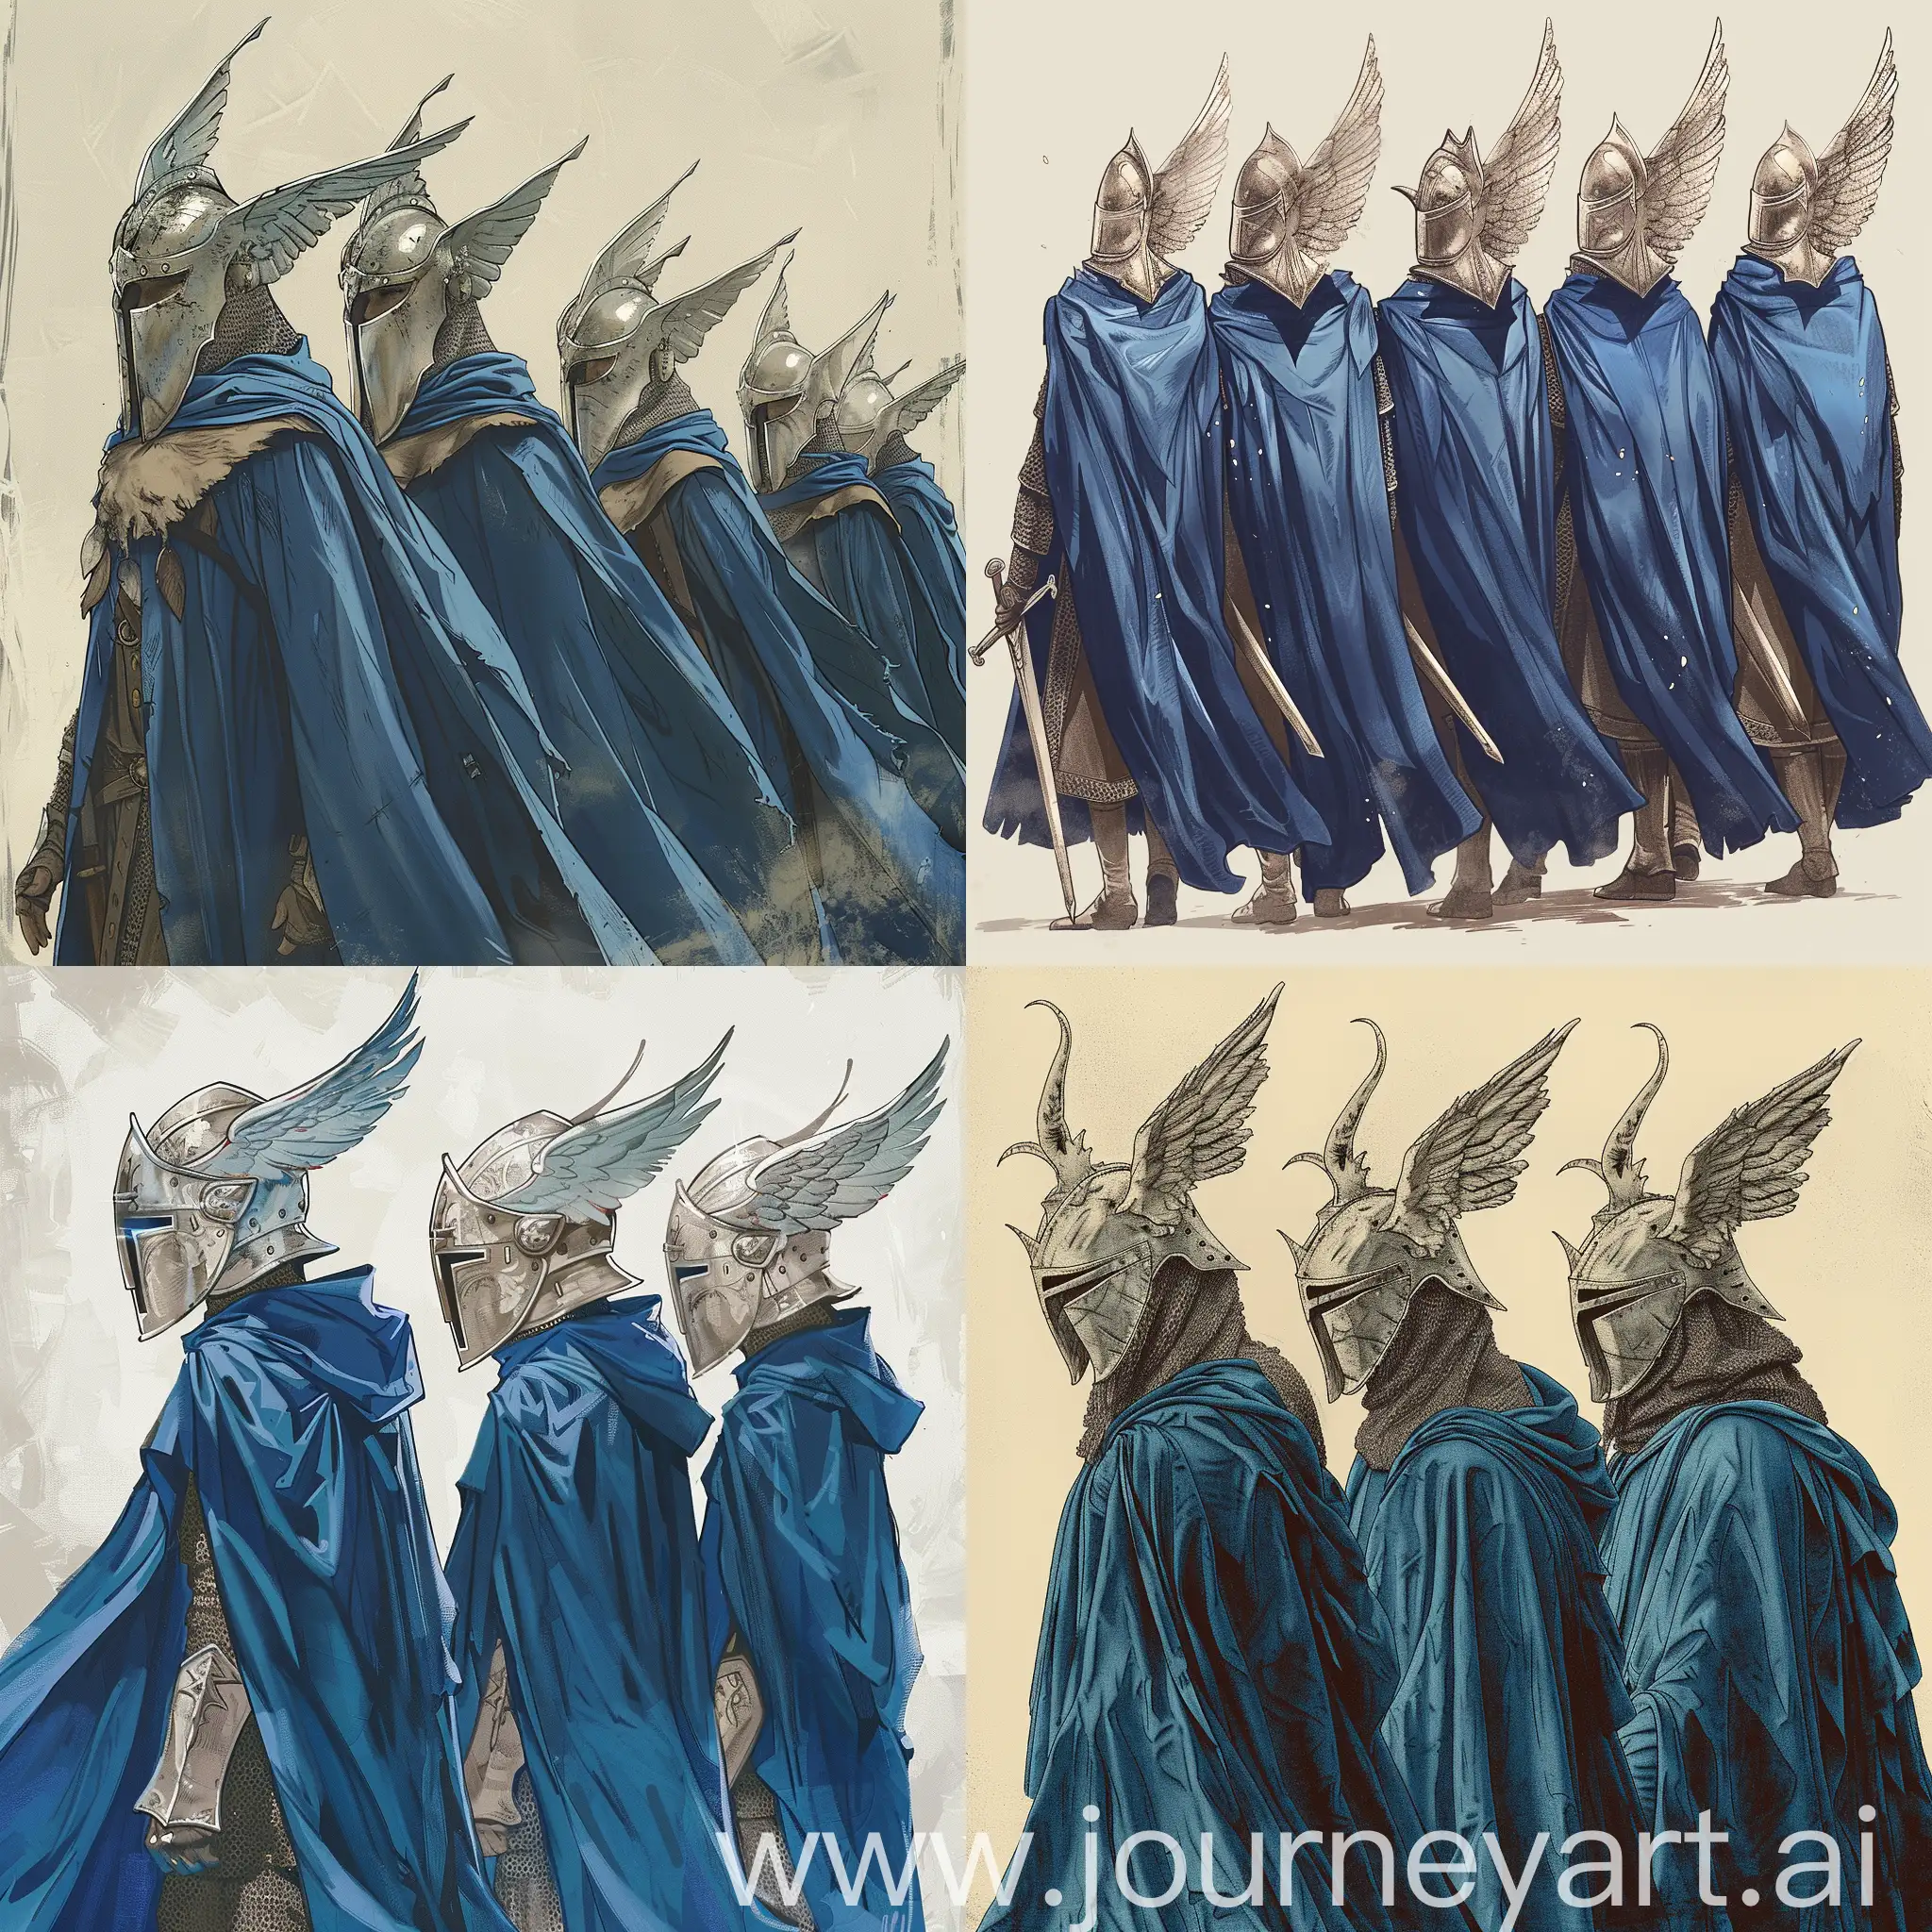 Gondorian-Knights-with-Winged-Helmets-in-Blue-Cloaks-Crusader-Kings-3-Style-Art